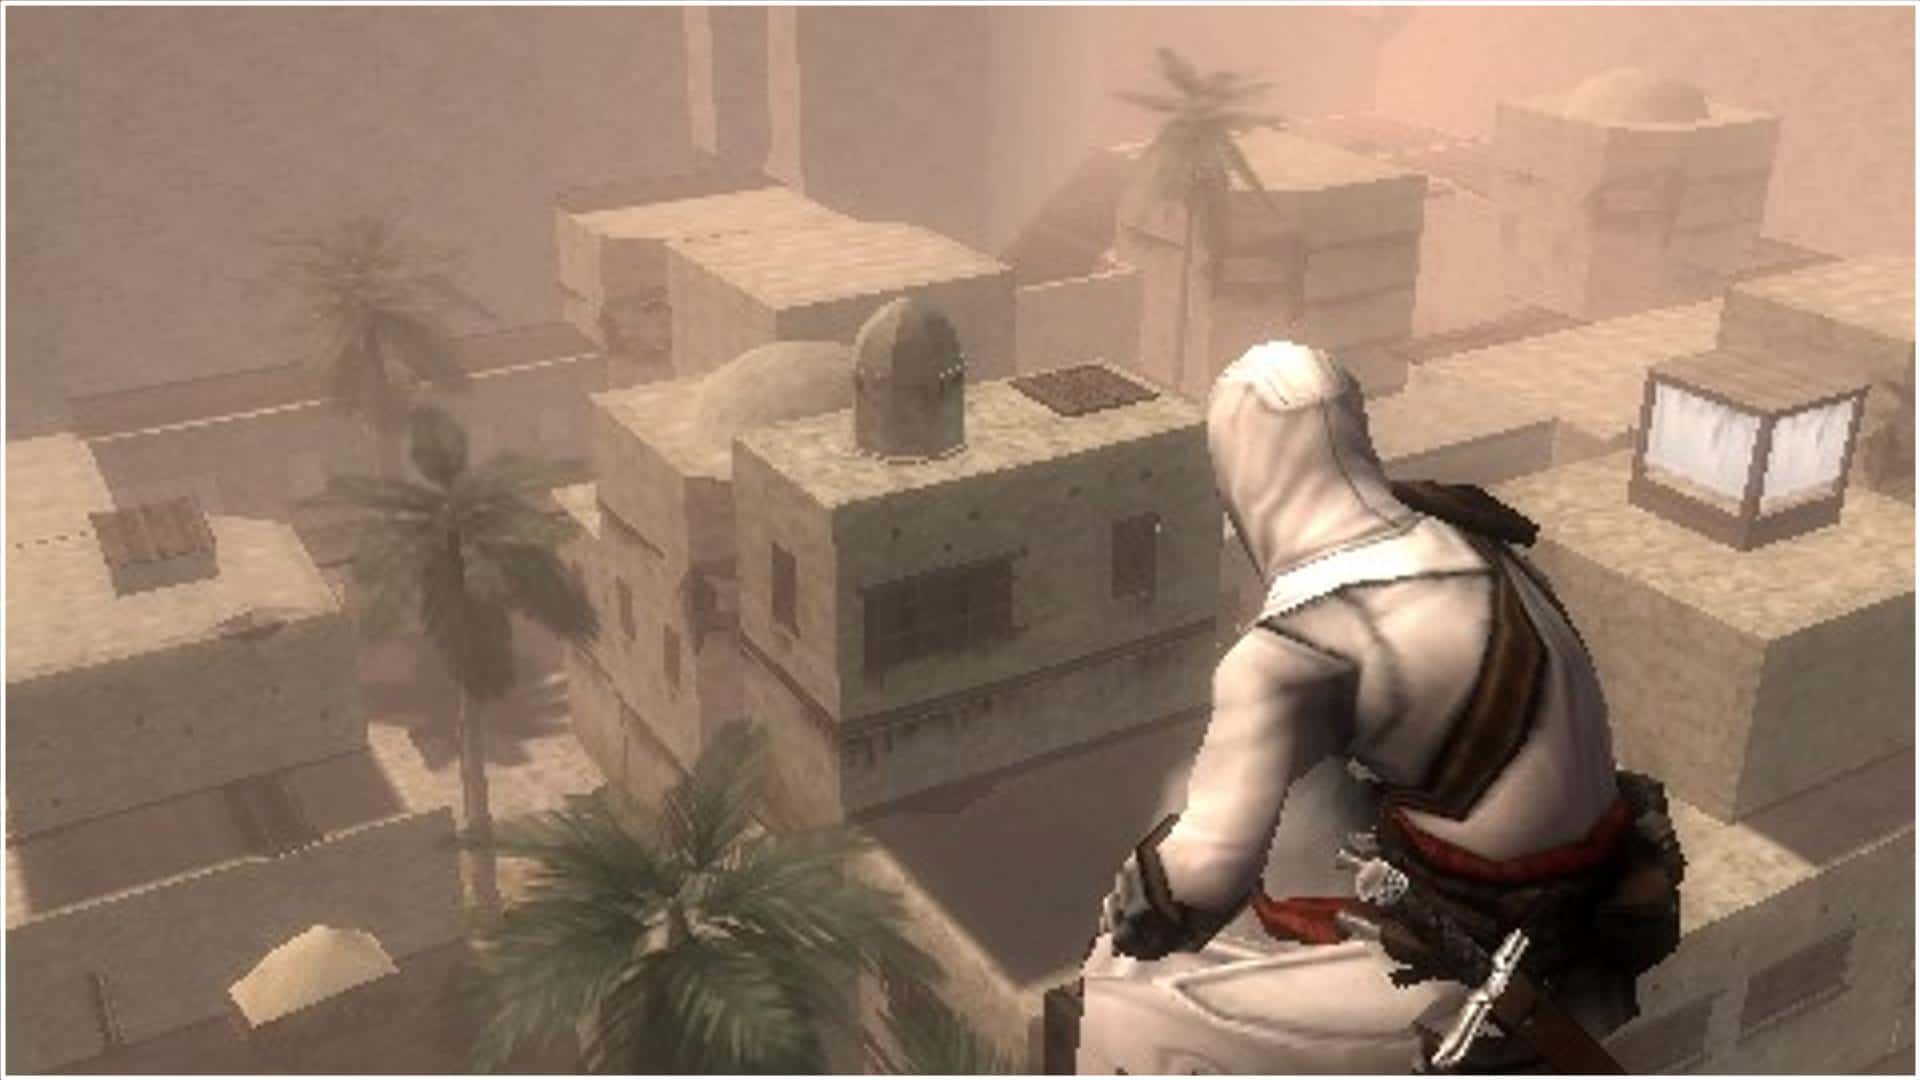 Assassin's Creed - Bloodlines ROM Free Download for PSP - ConsoleRoms